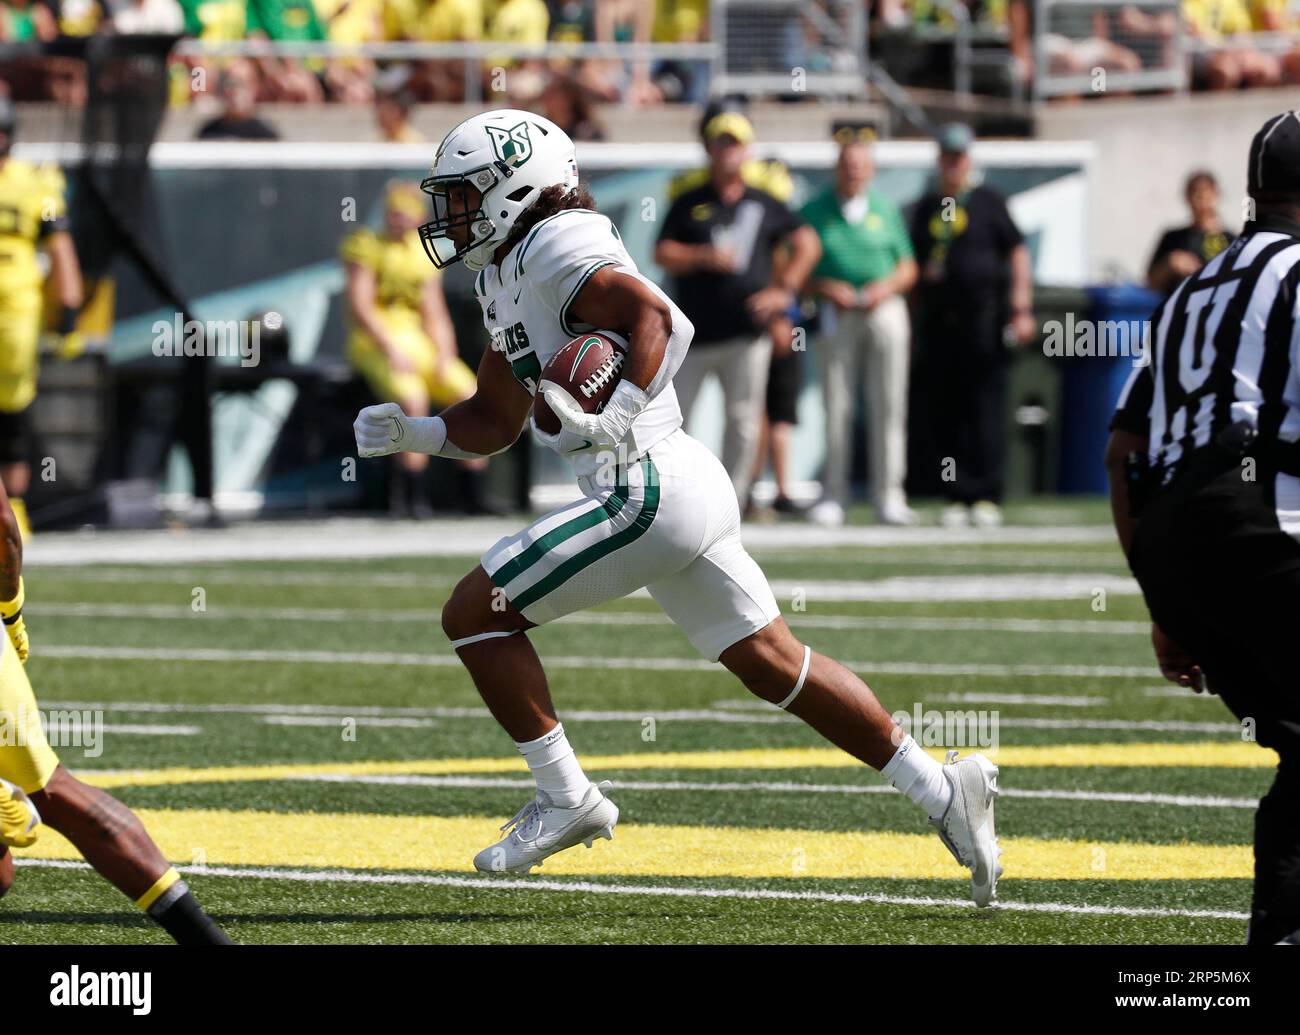 Autzen Stadium, Eugene, OR, USA. 2nd Sep, 2023. Portland State Vikings running back Quincy Craig (17) carries the ball during the NCAA football game between the Portland State Vikings and the University of Oregon Ducks at Autzen Stadium, Eugene, OR. Larry C. Lawson/CSM/Alamy Live News Stock Photo